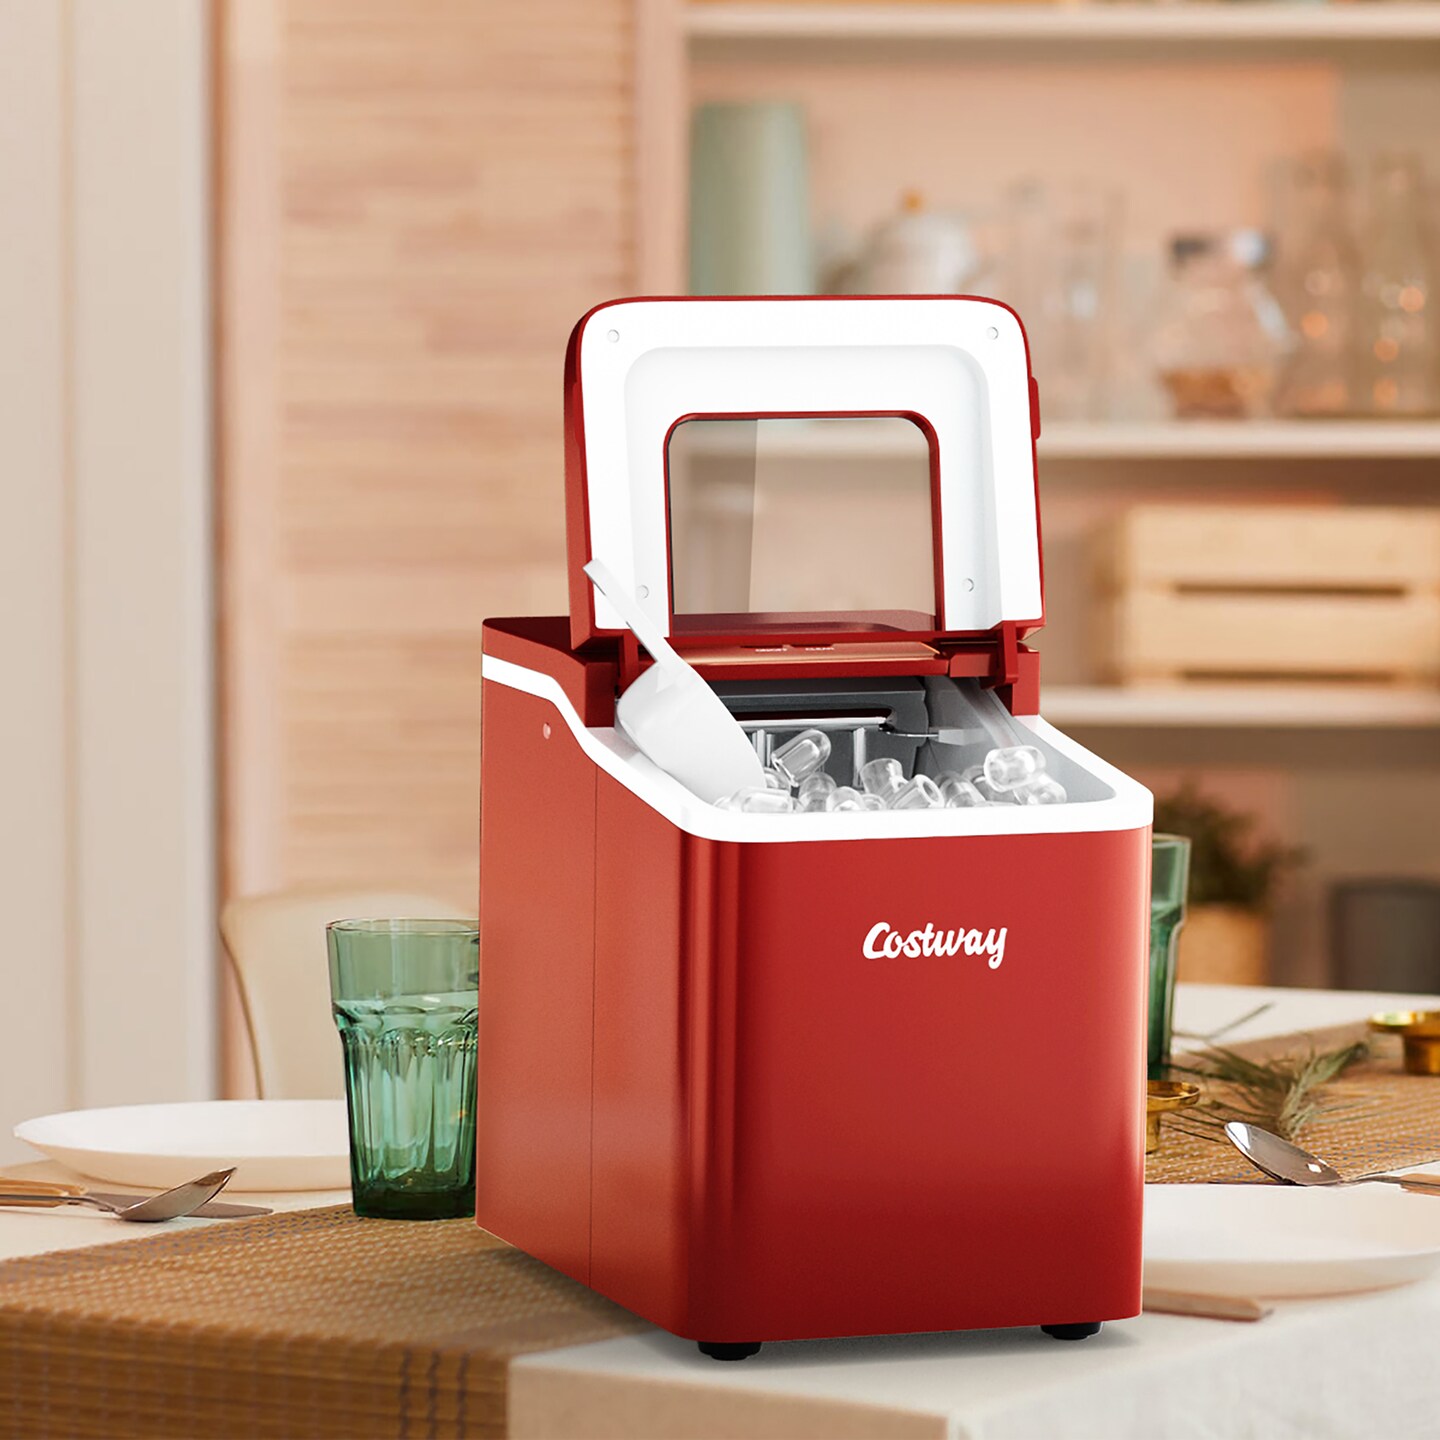 Costway Portable Ice Maker Machine Countertop 26Lbs/24H Self-cleaning w/ Scoop Silver\Green